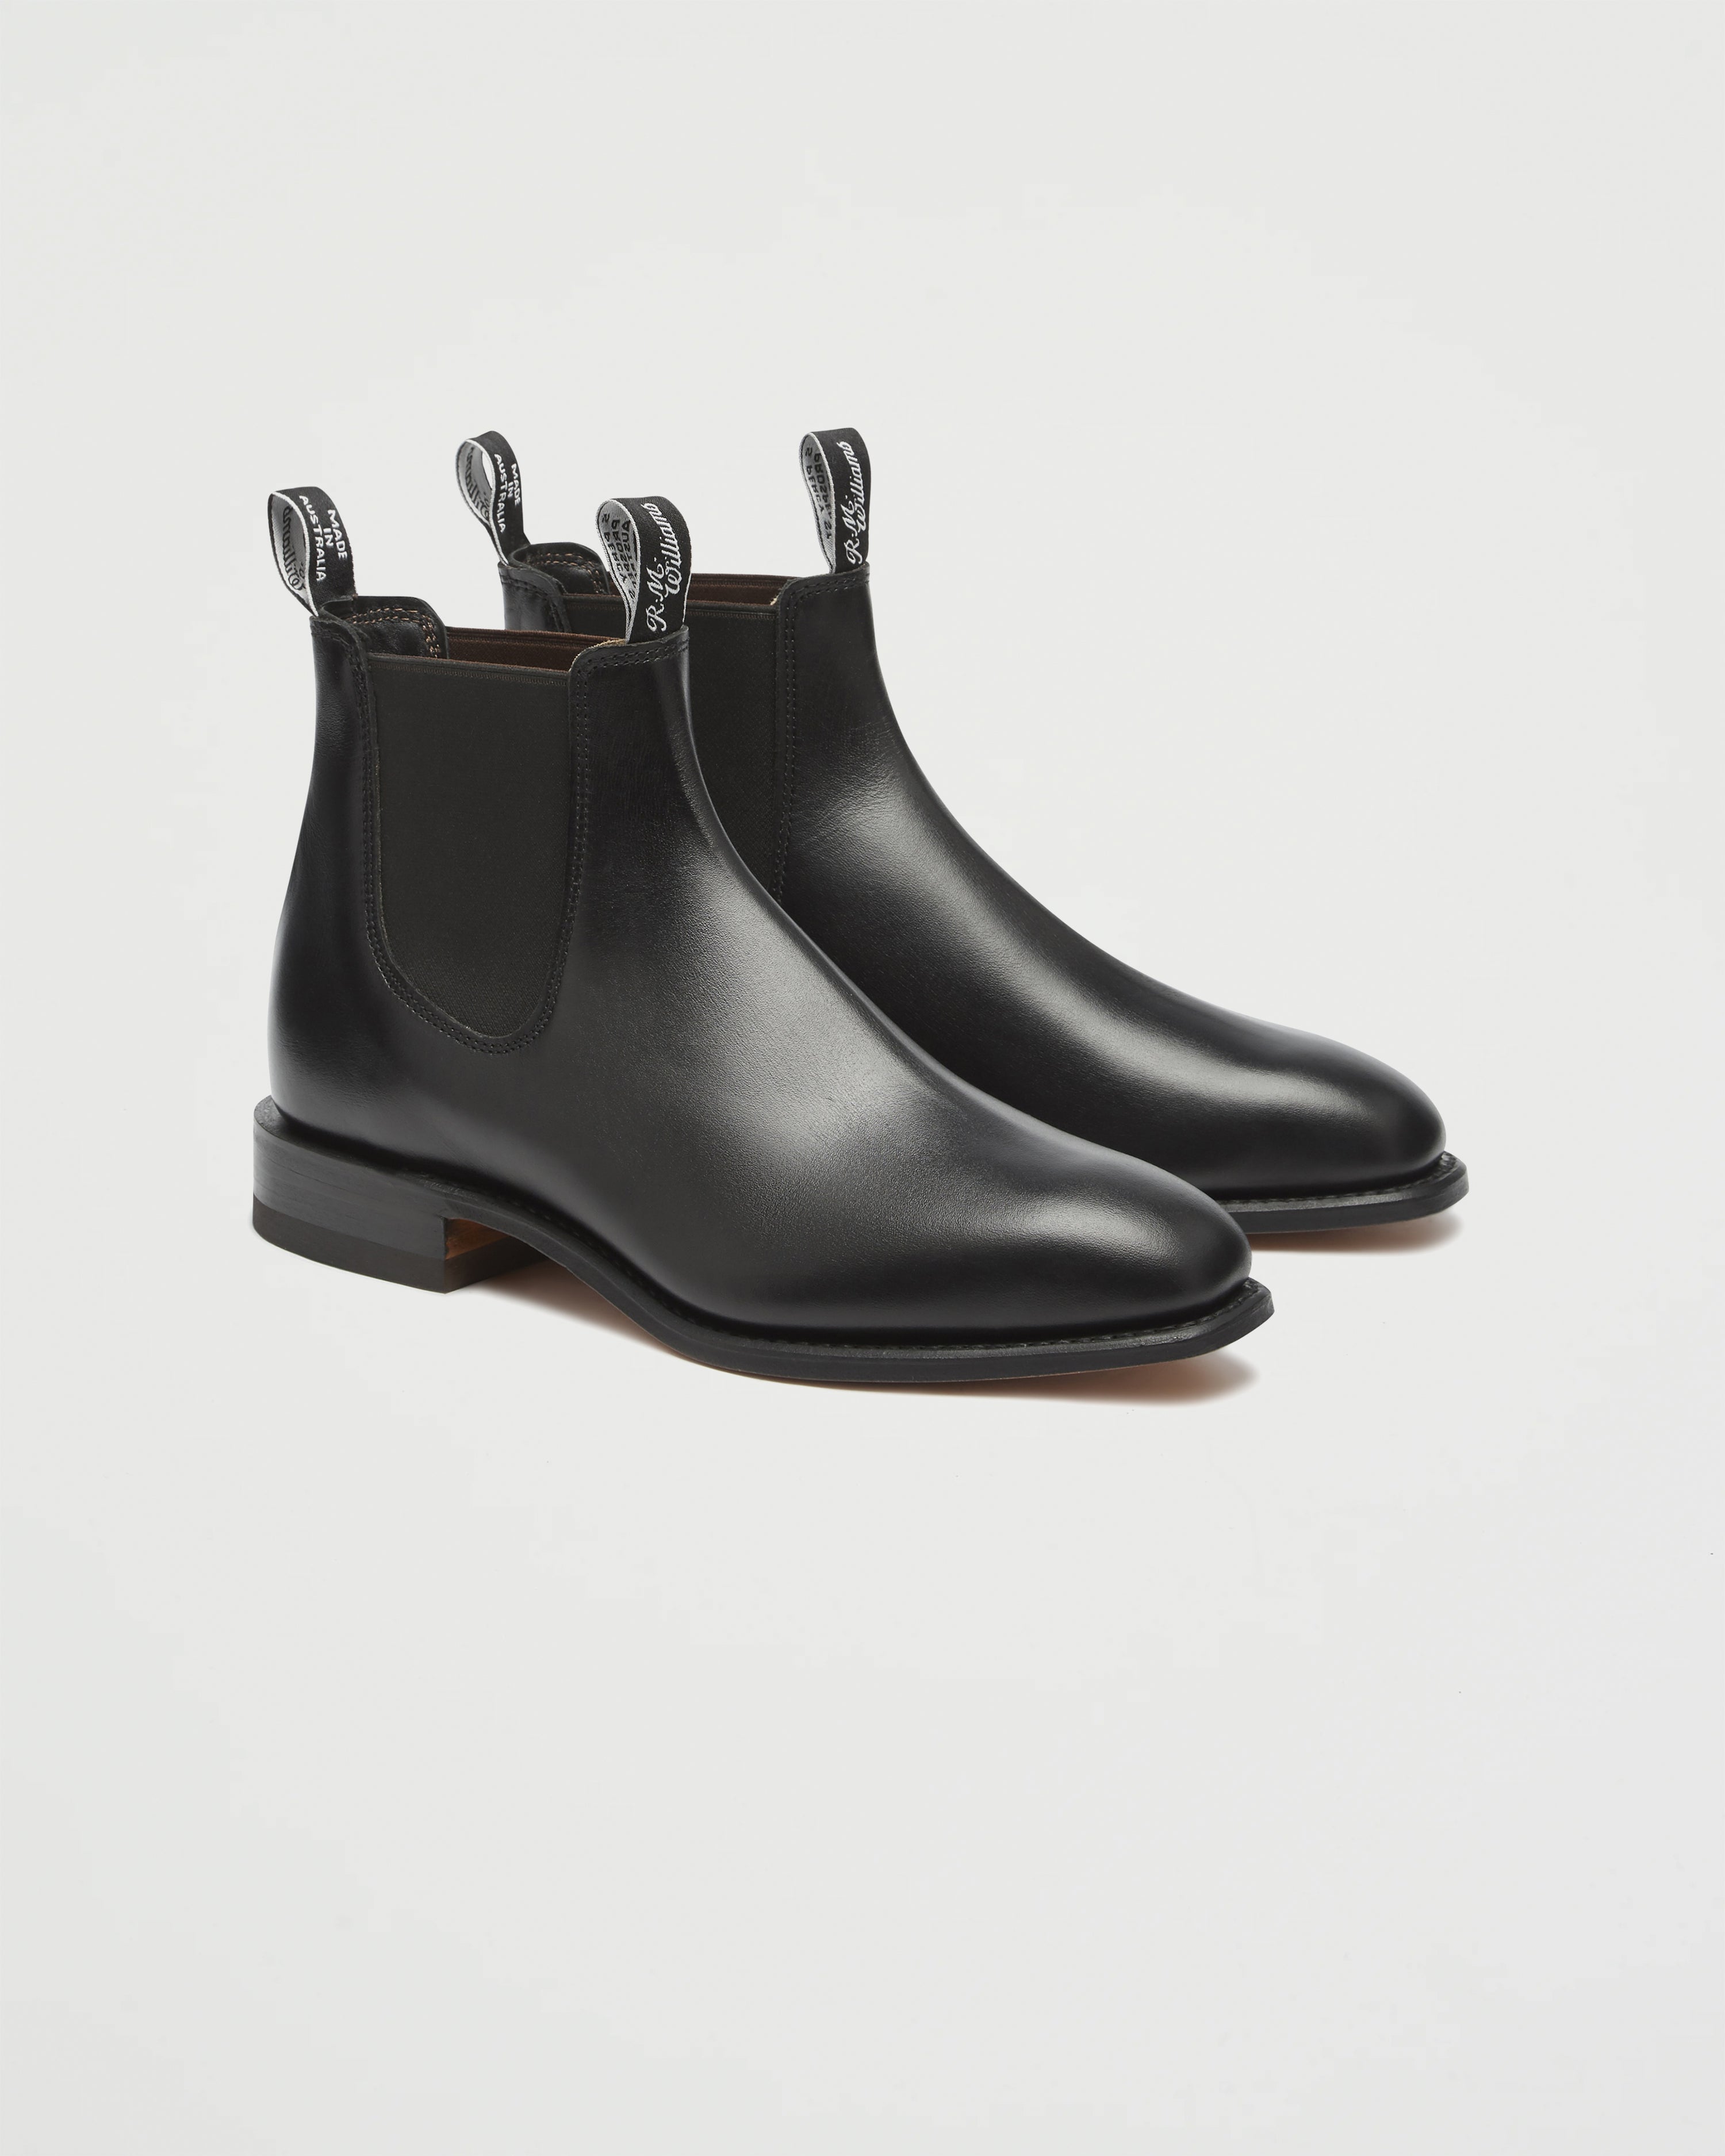 Black Craftsman Boots, R.M.Williams Chelsea Boots